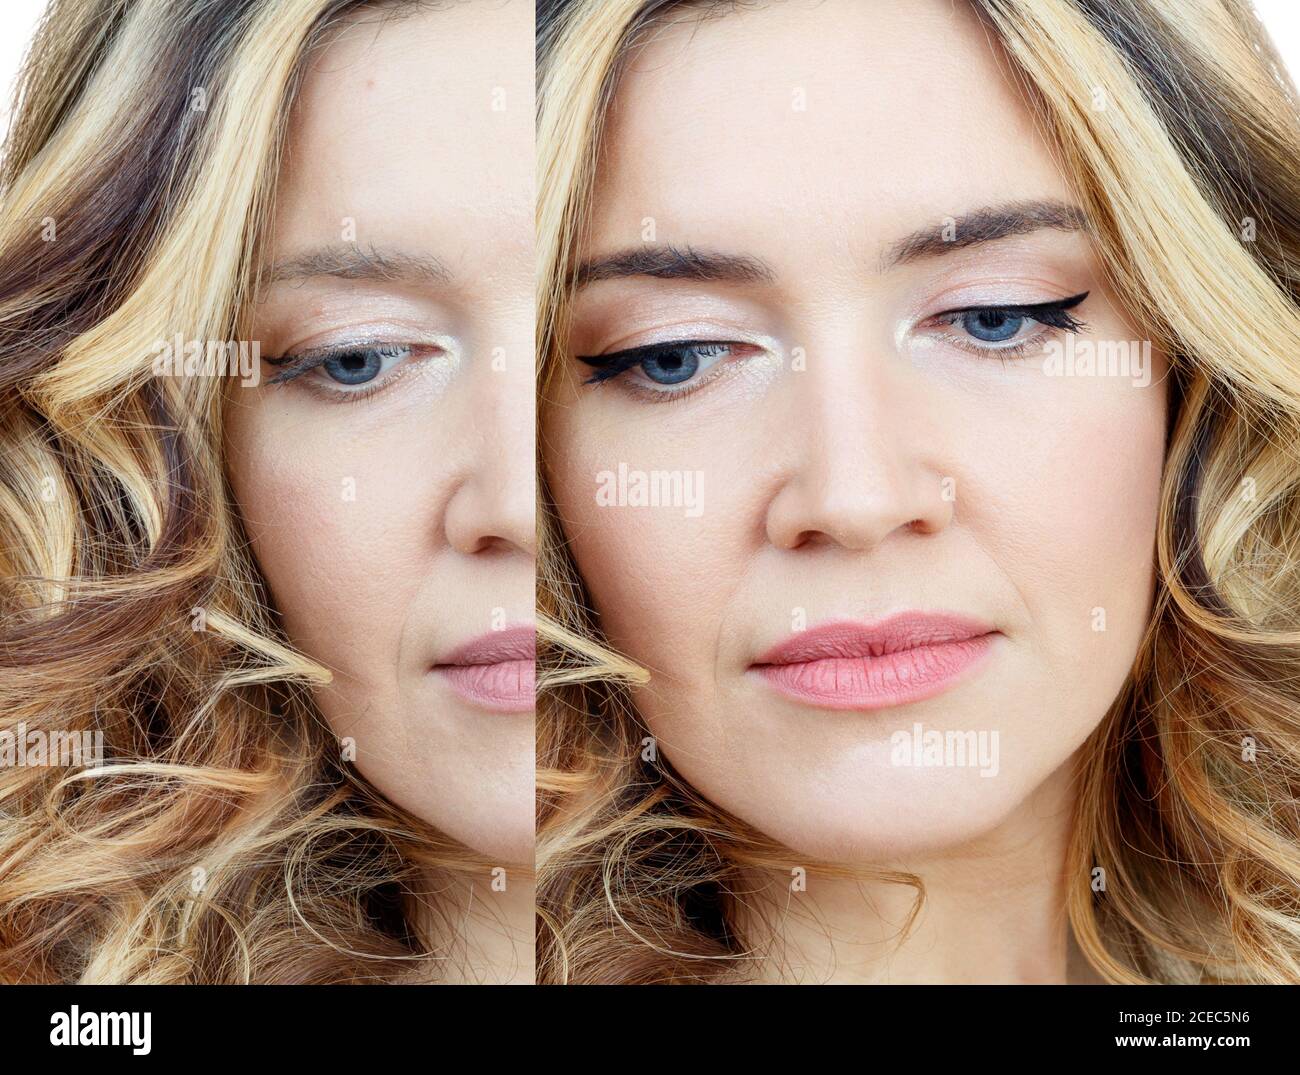 Comparison portrait of adult woman with and without makeup. Stock Photo